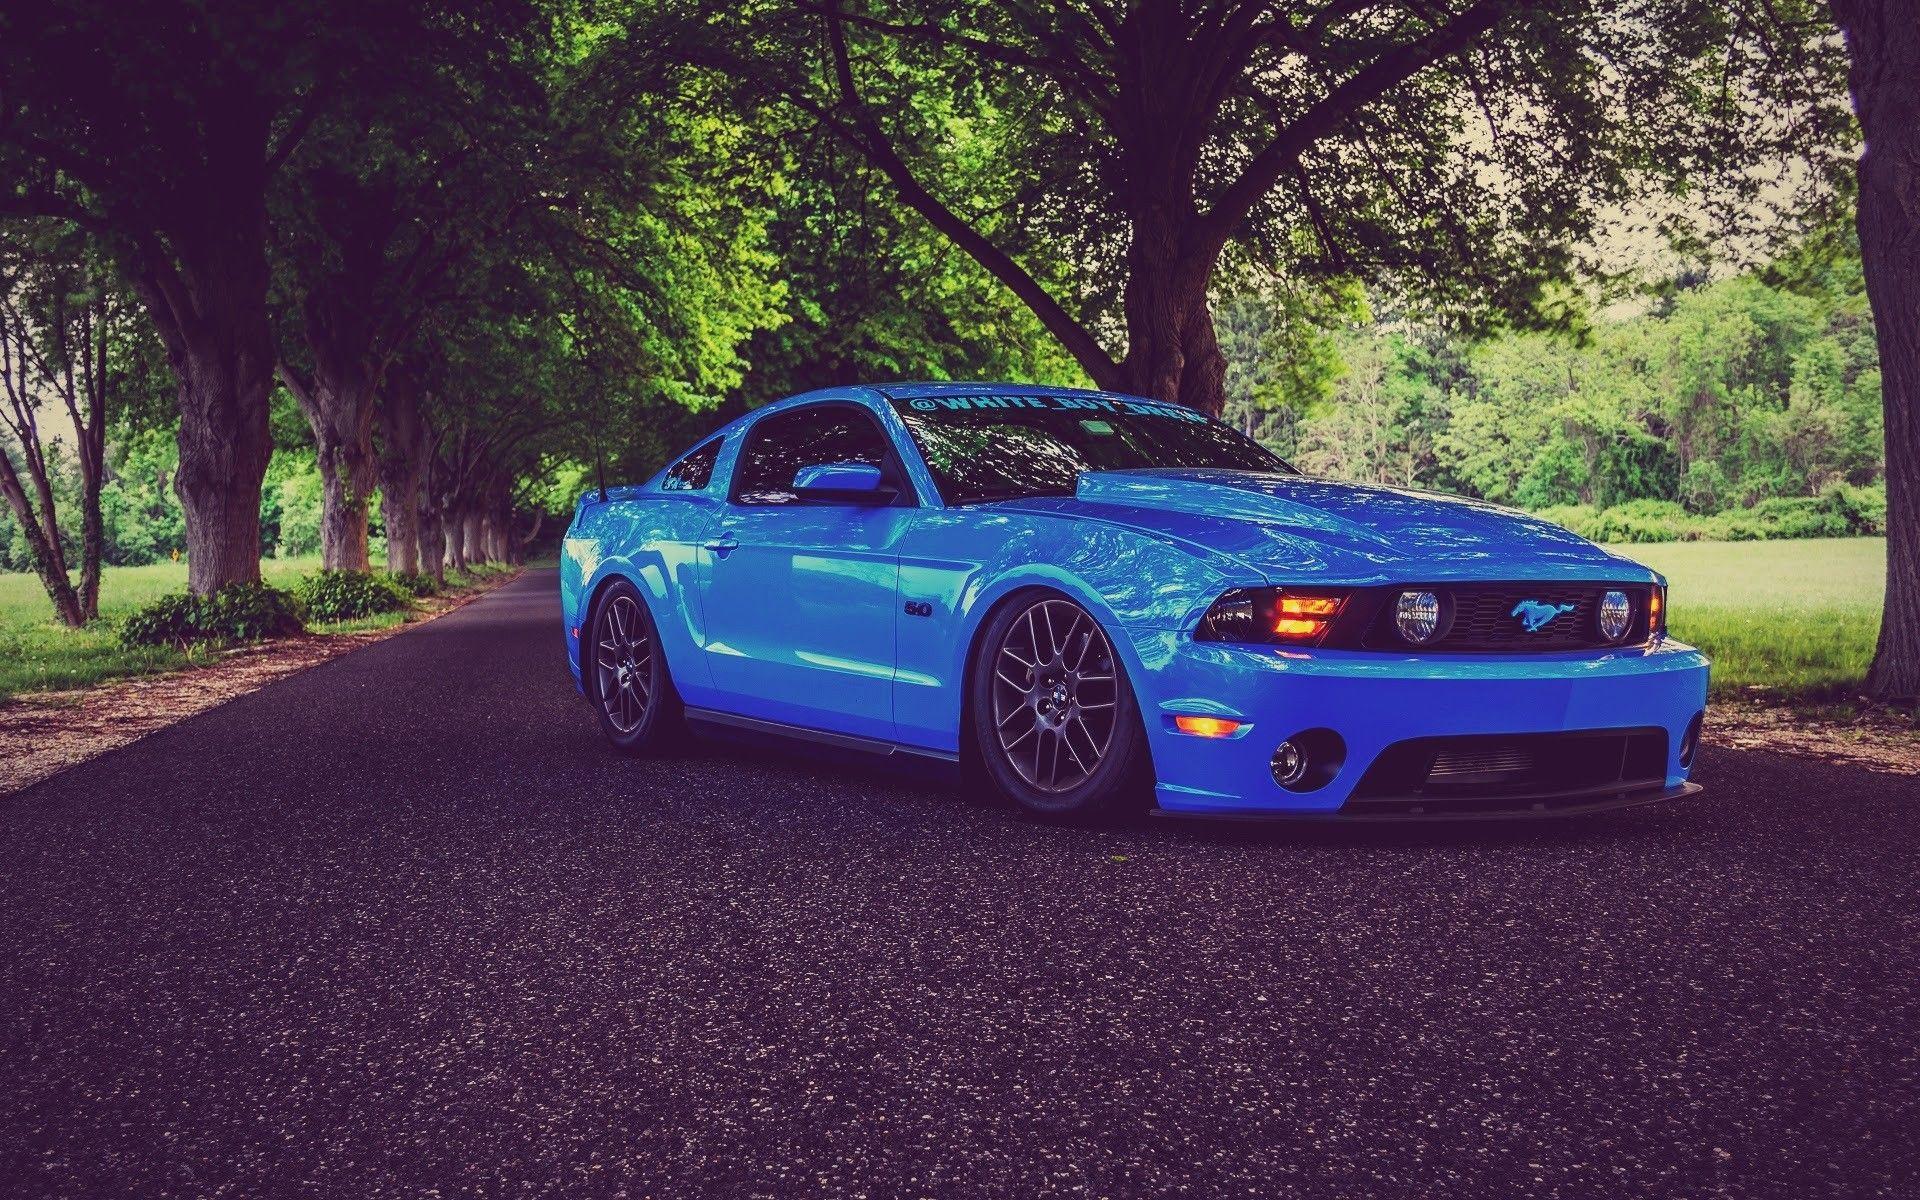 Ford Mustang, Muscle Cars, Low Ride, Tuning, Blue Cars Wallpaper